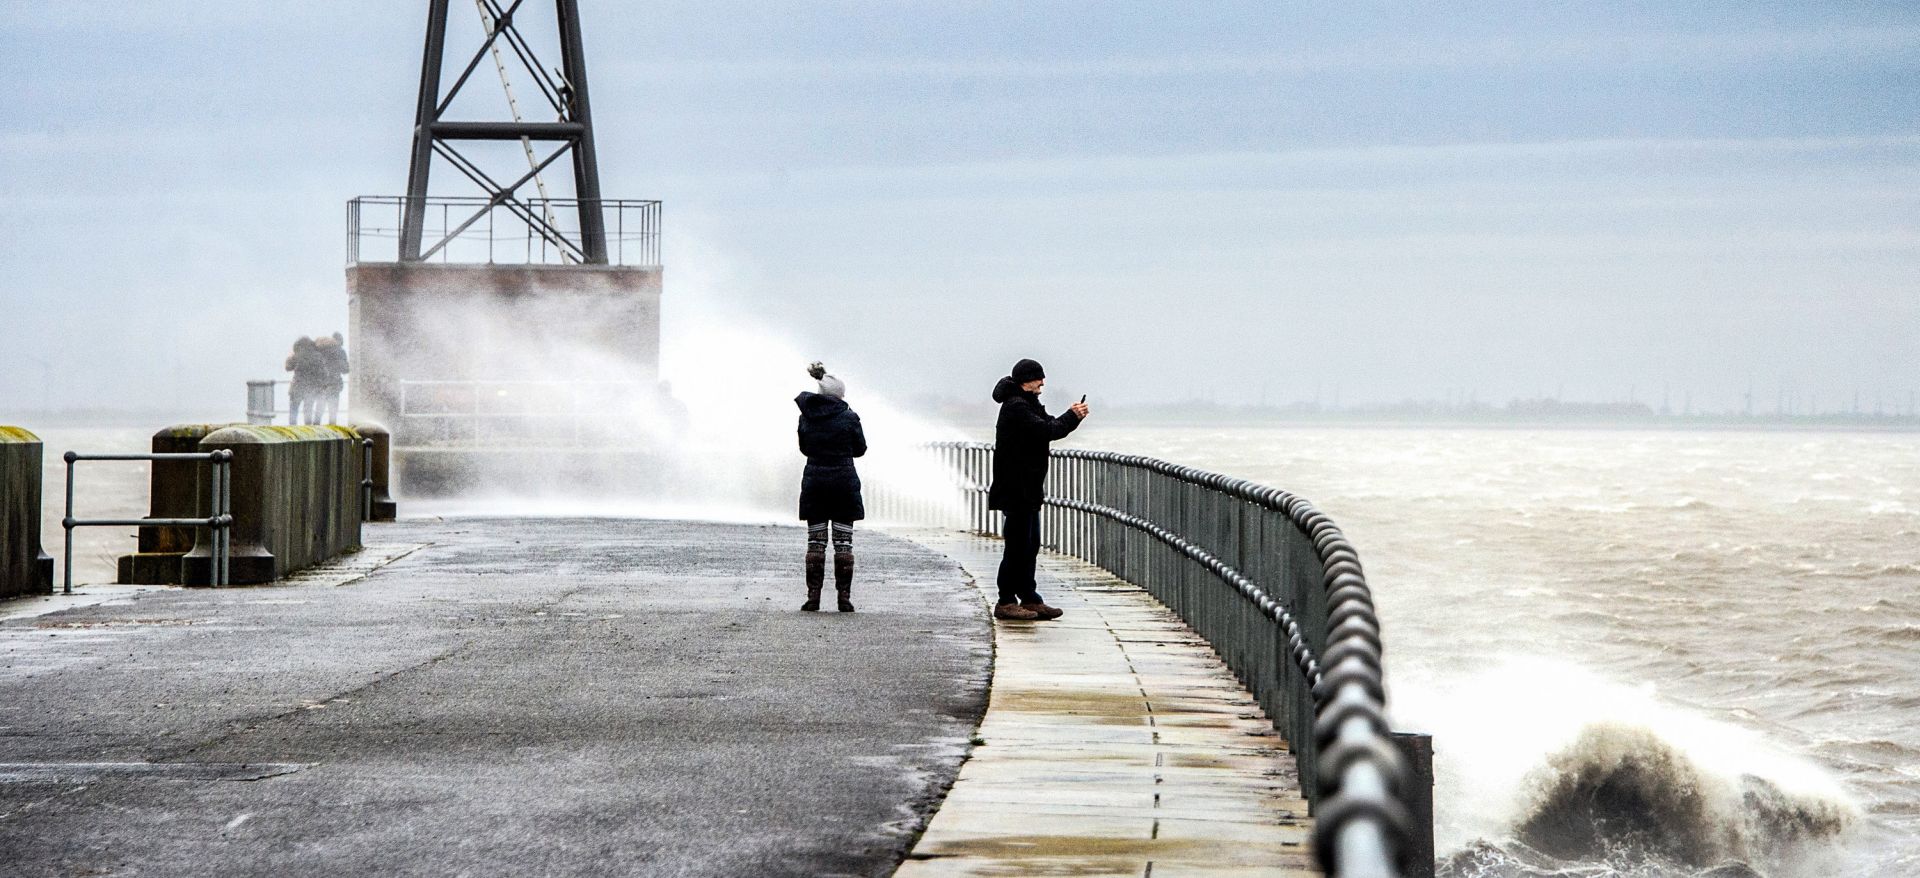 09 February 2020, Lower Saxony, Wilhelmshaven: Passers-by take pictures of the waves on a pier amid turbulent weather conditions due to storm Sabine. Photo: Hauke-Christian Dittrich/dpa